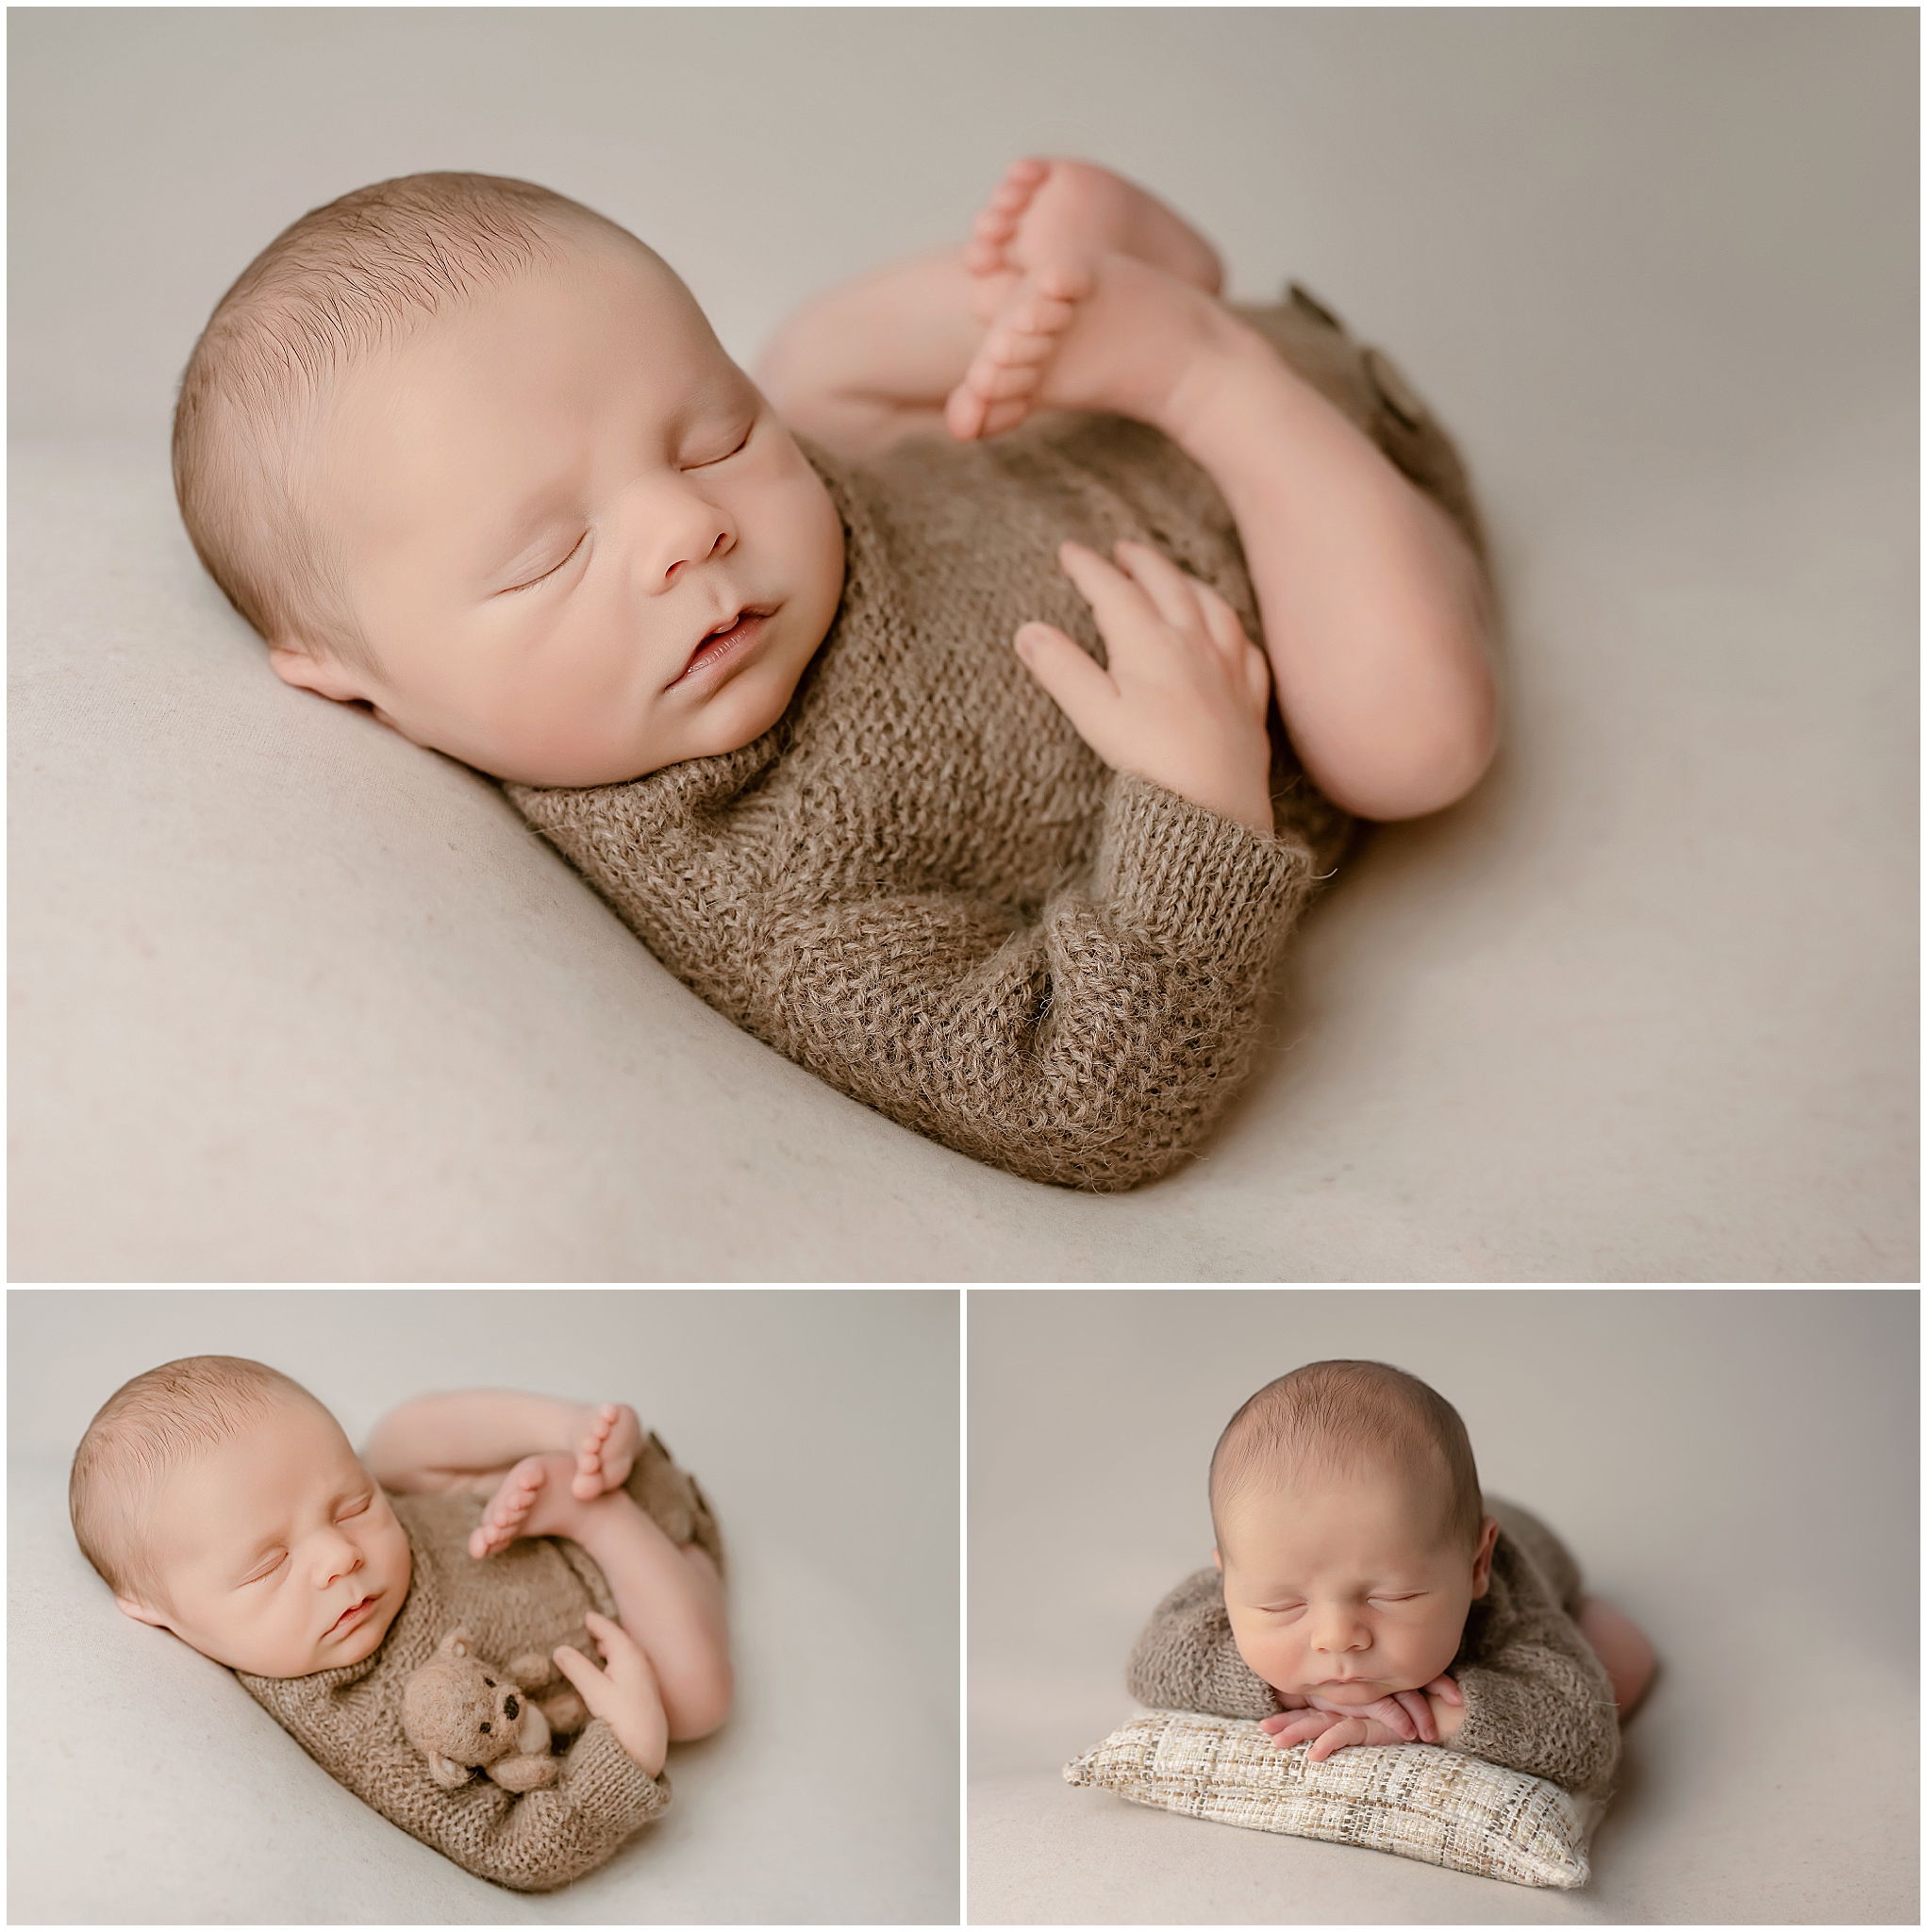 baby sleeping in neutrals during newborn photography session at studio in london ontario